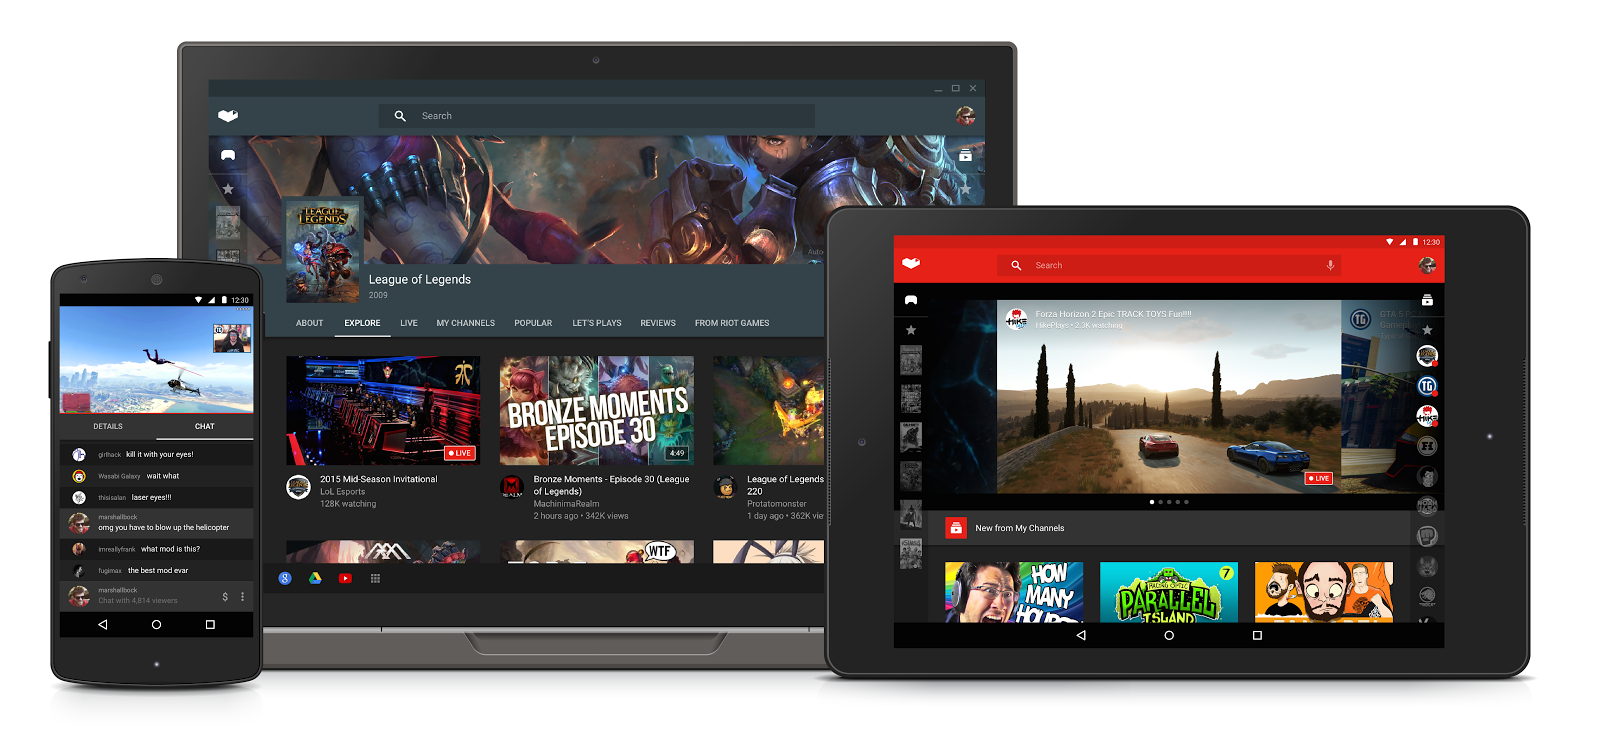 YouTube Gaming is set to duke it out with Twitch with live game streaming and more